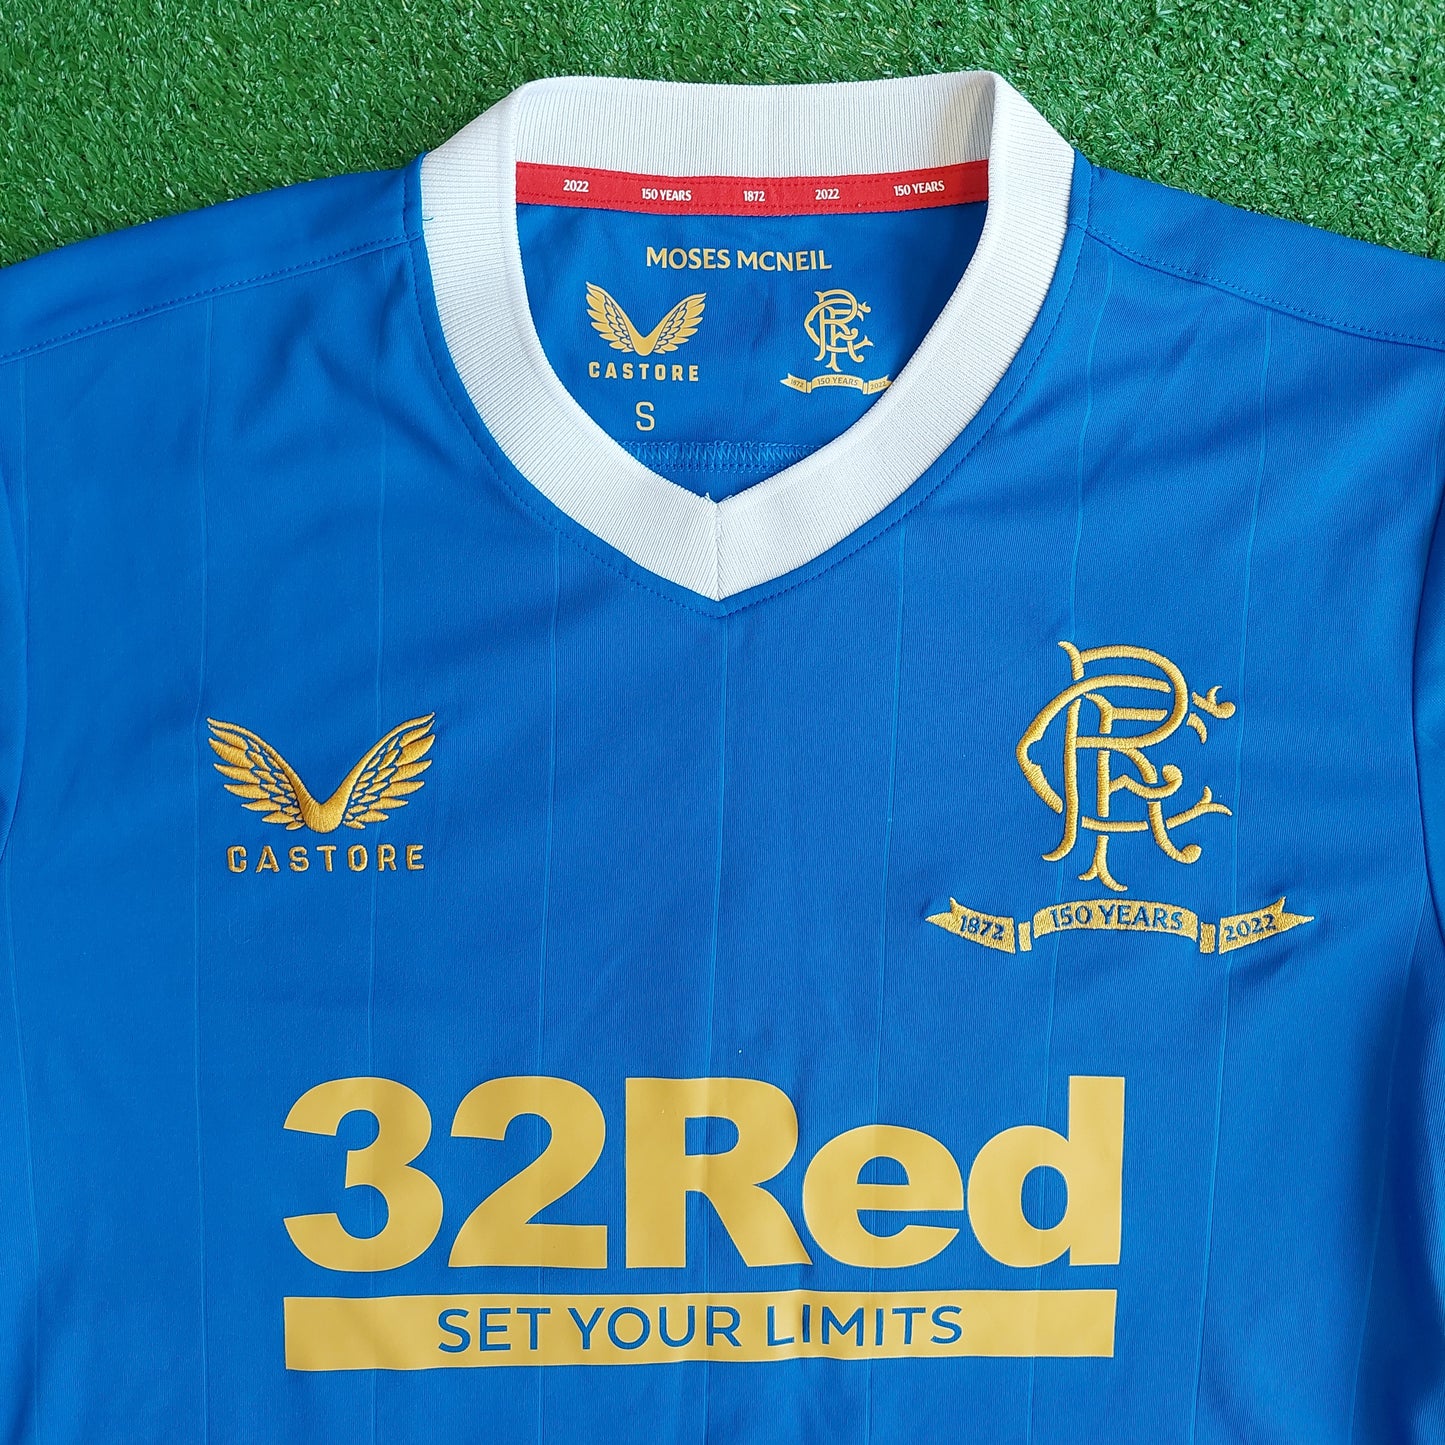 Rangers F.C. 2021/22 *150 Years Anniversary* Home Shirt (Excellent) - Size S